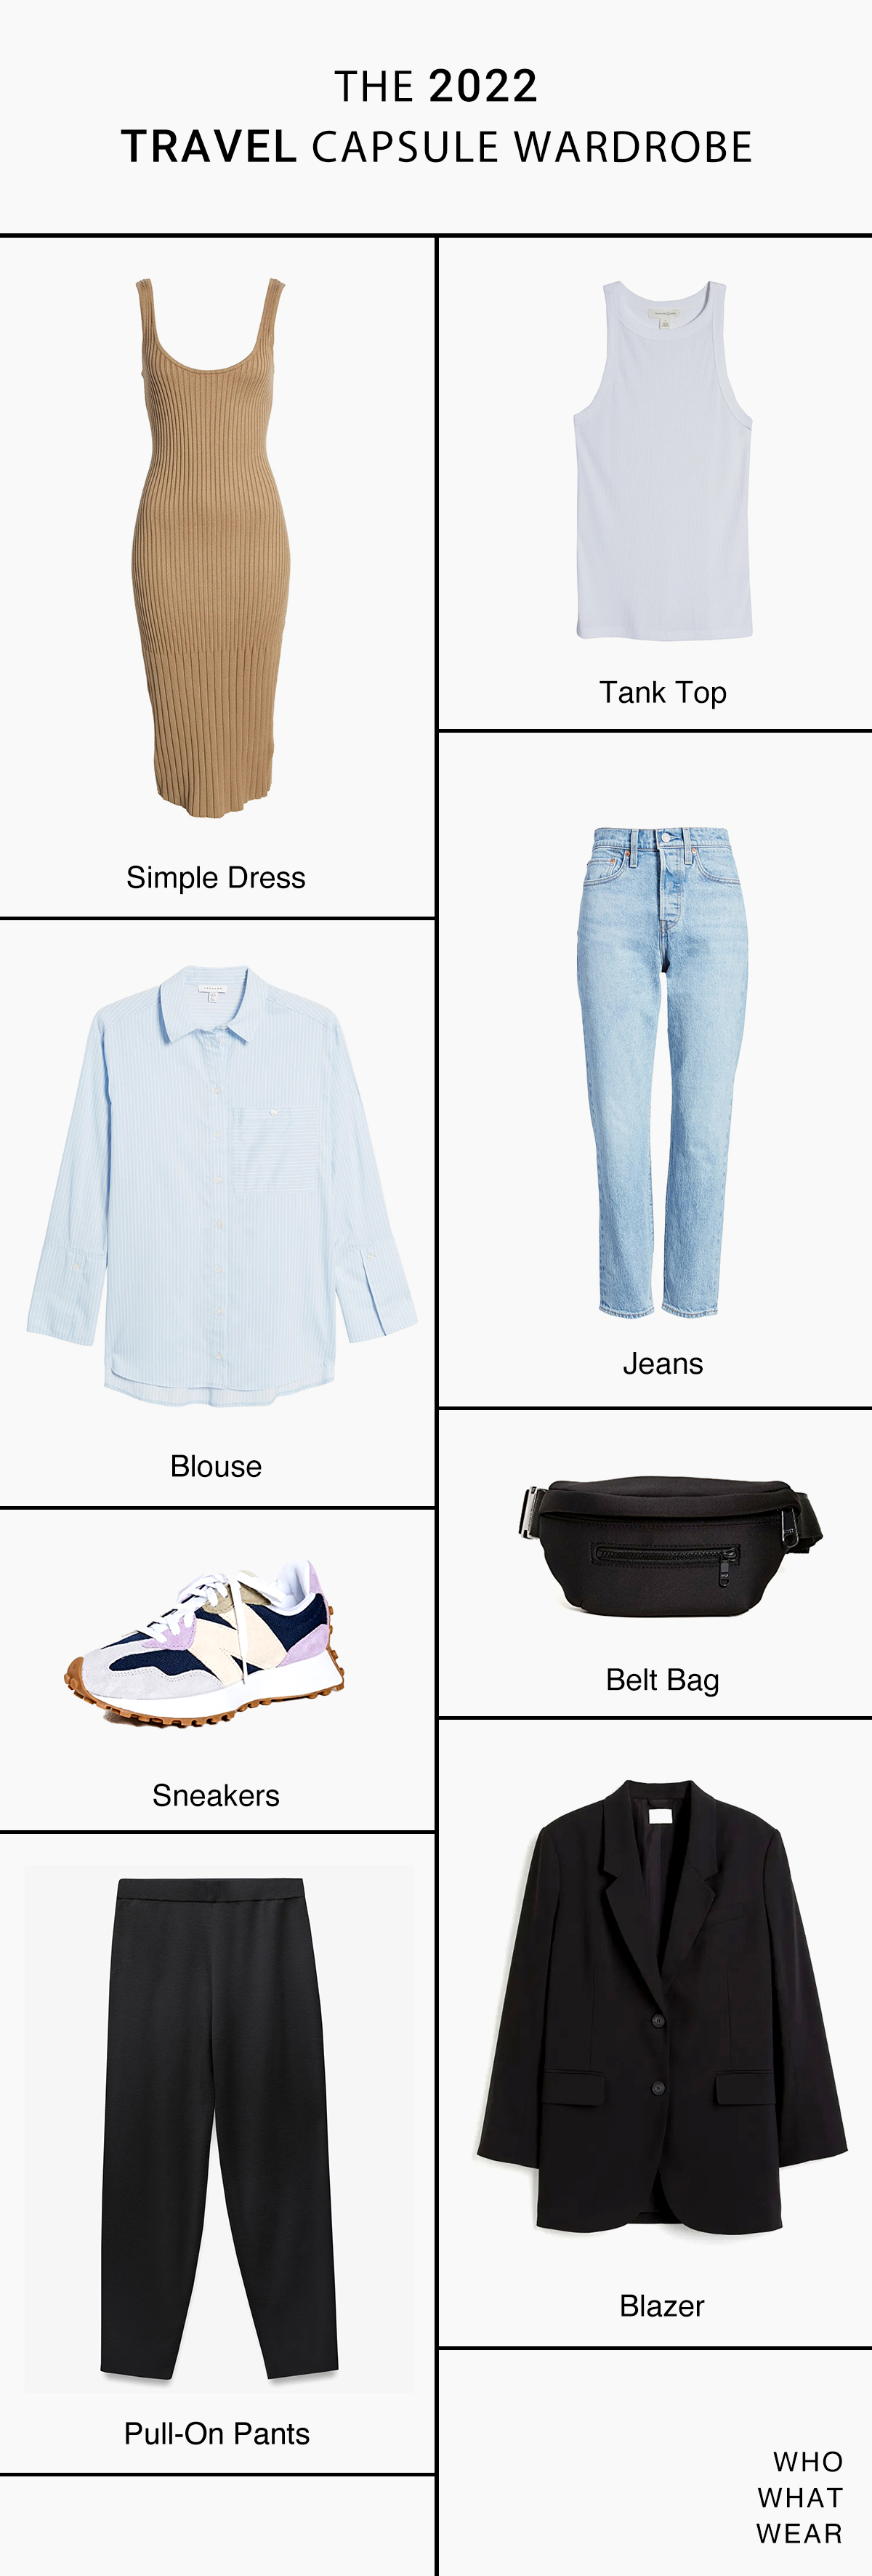 How to Build a Travel Capsule Wardrobe | Who What Wear